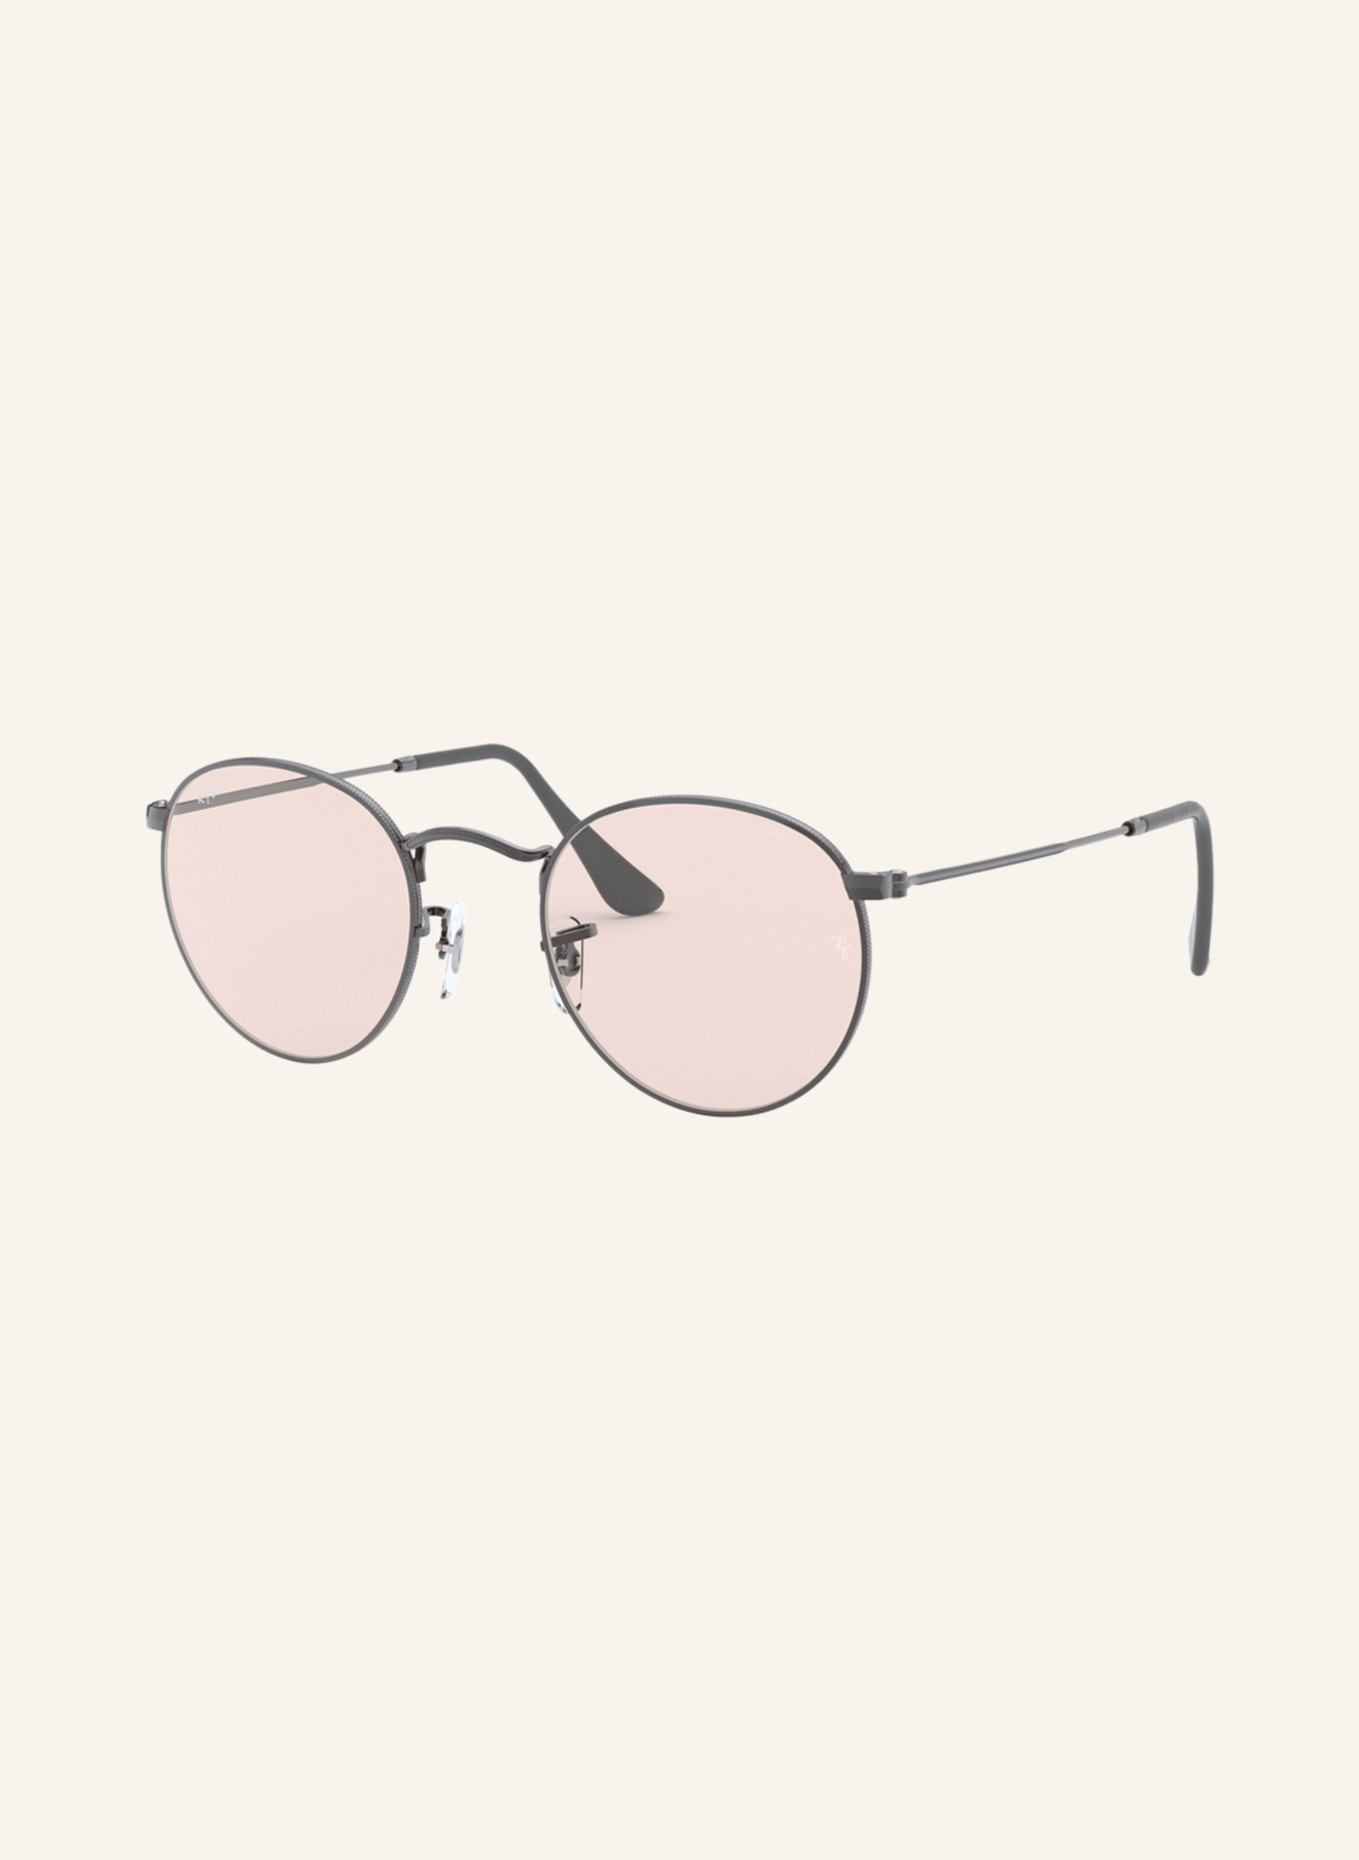 Ray-Ban Sunglasses RB3447 ROUND, Color: 004/T5 - DARK GRAY/LIGHT PINK (Image 1)